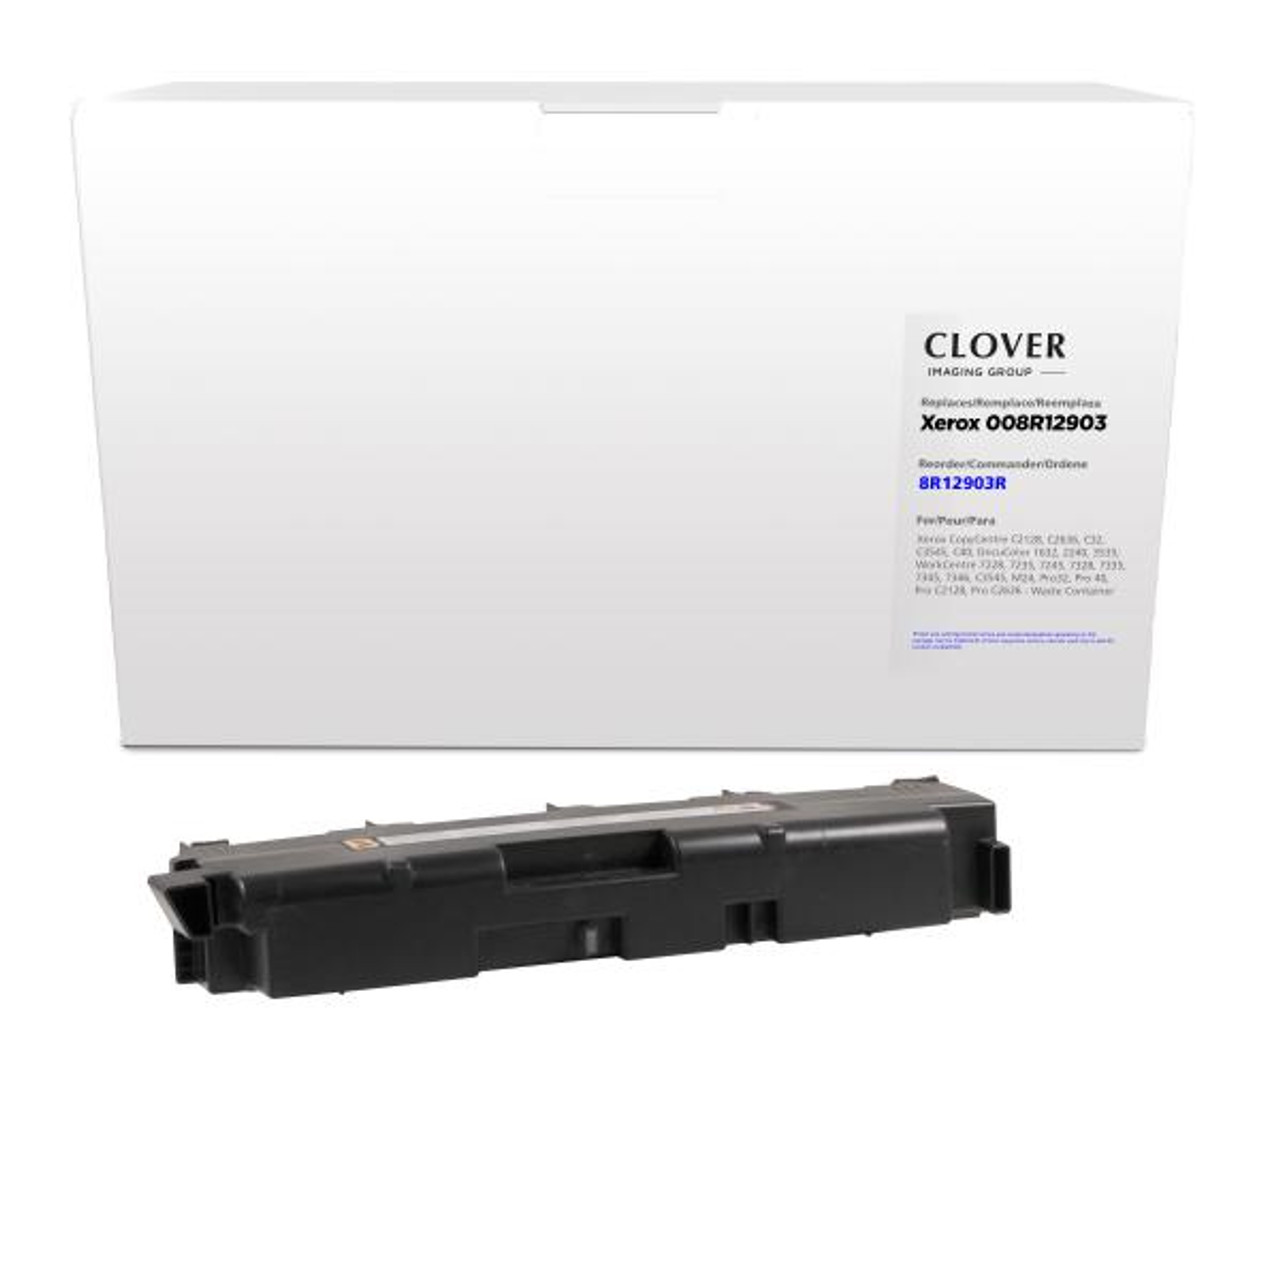 Waste Container for Xerox 008R12903-1